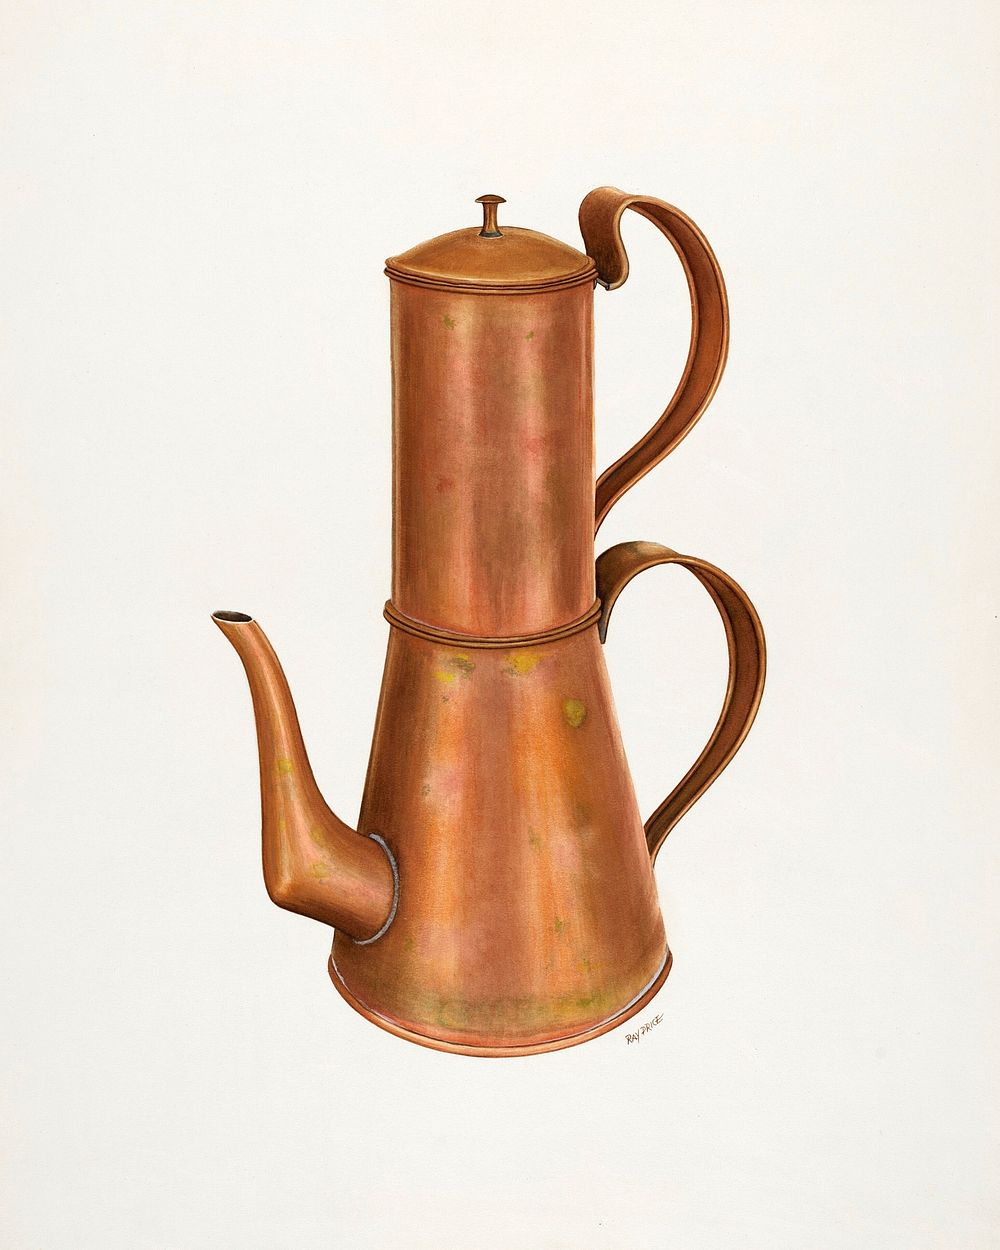 Coffee Pot (ca.1938) by Ray Price. Original from The National Gallery of Art. Digitally enhanced by rawpixel.